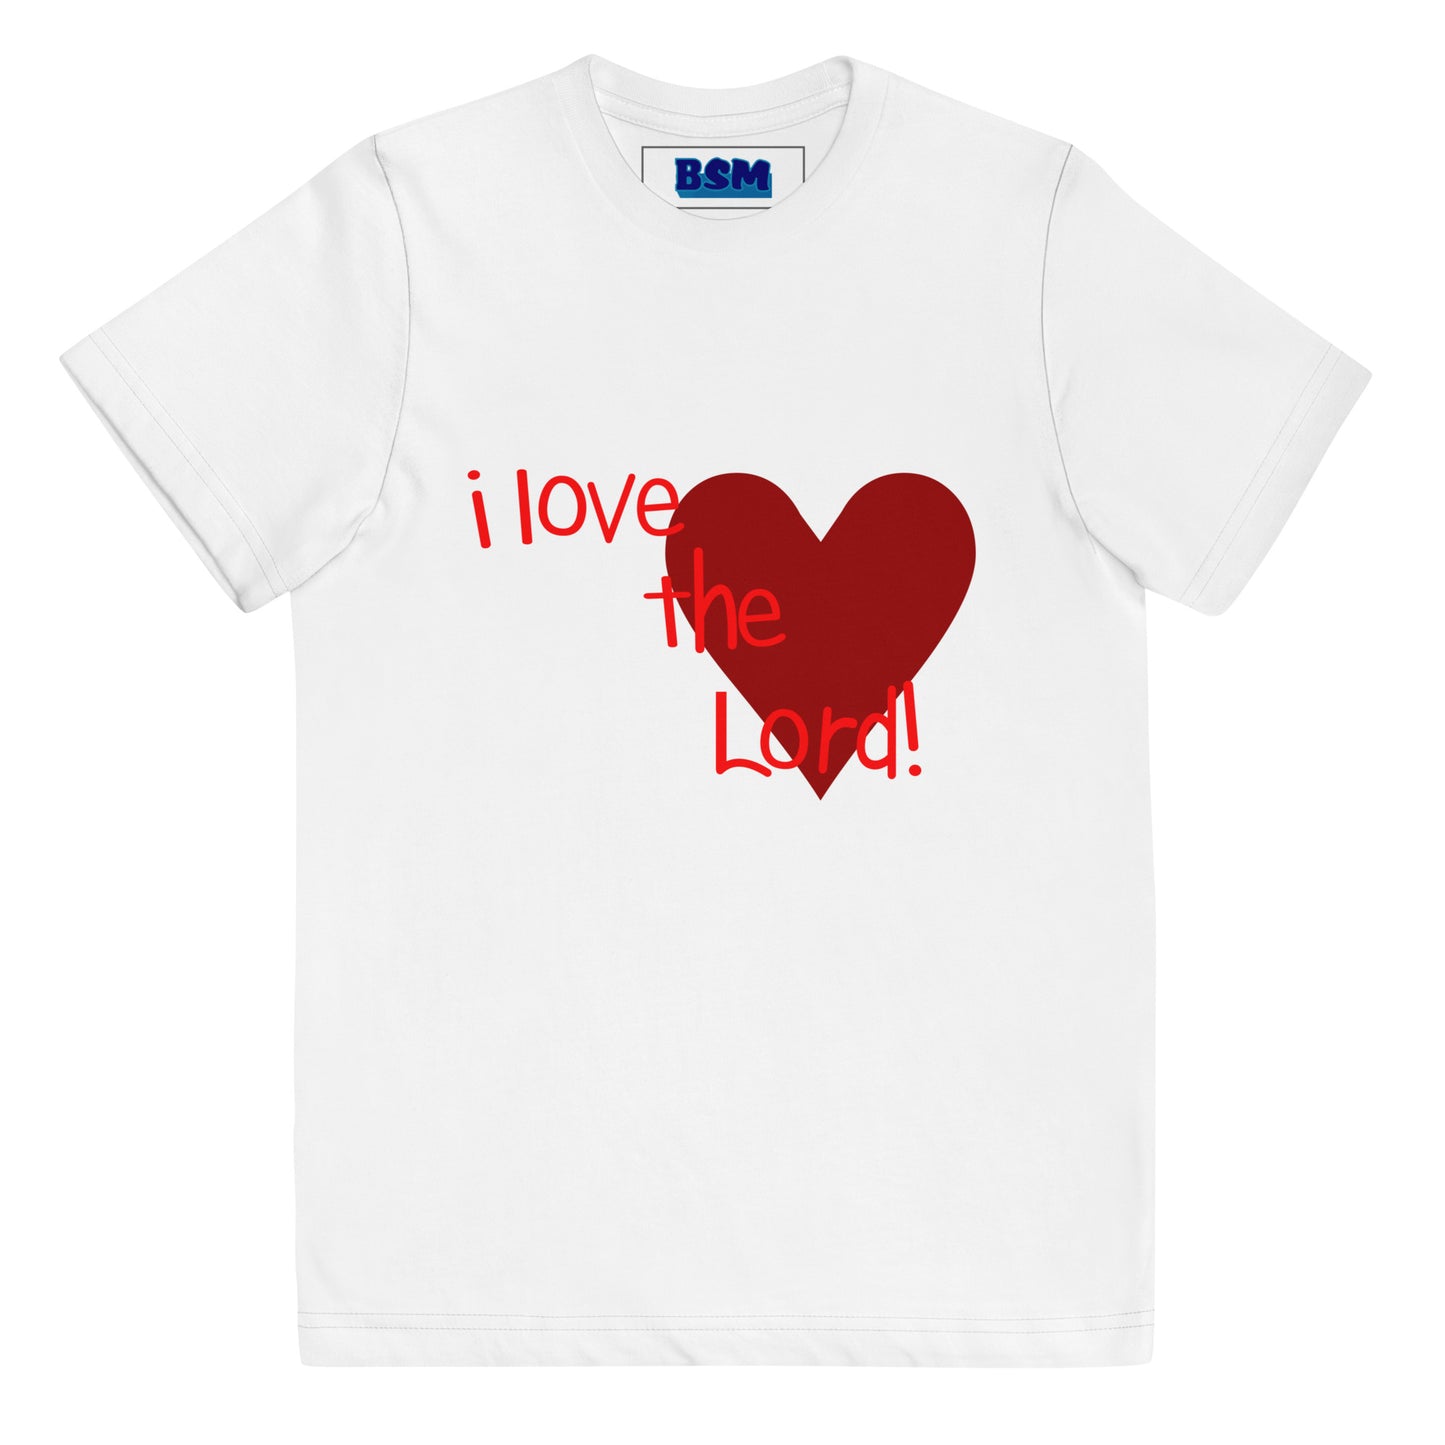 I Love the Lord (Heart) Youth Tee